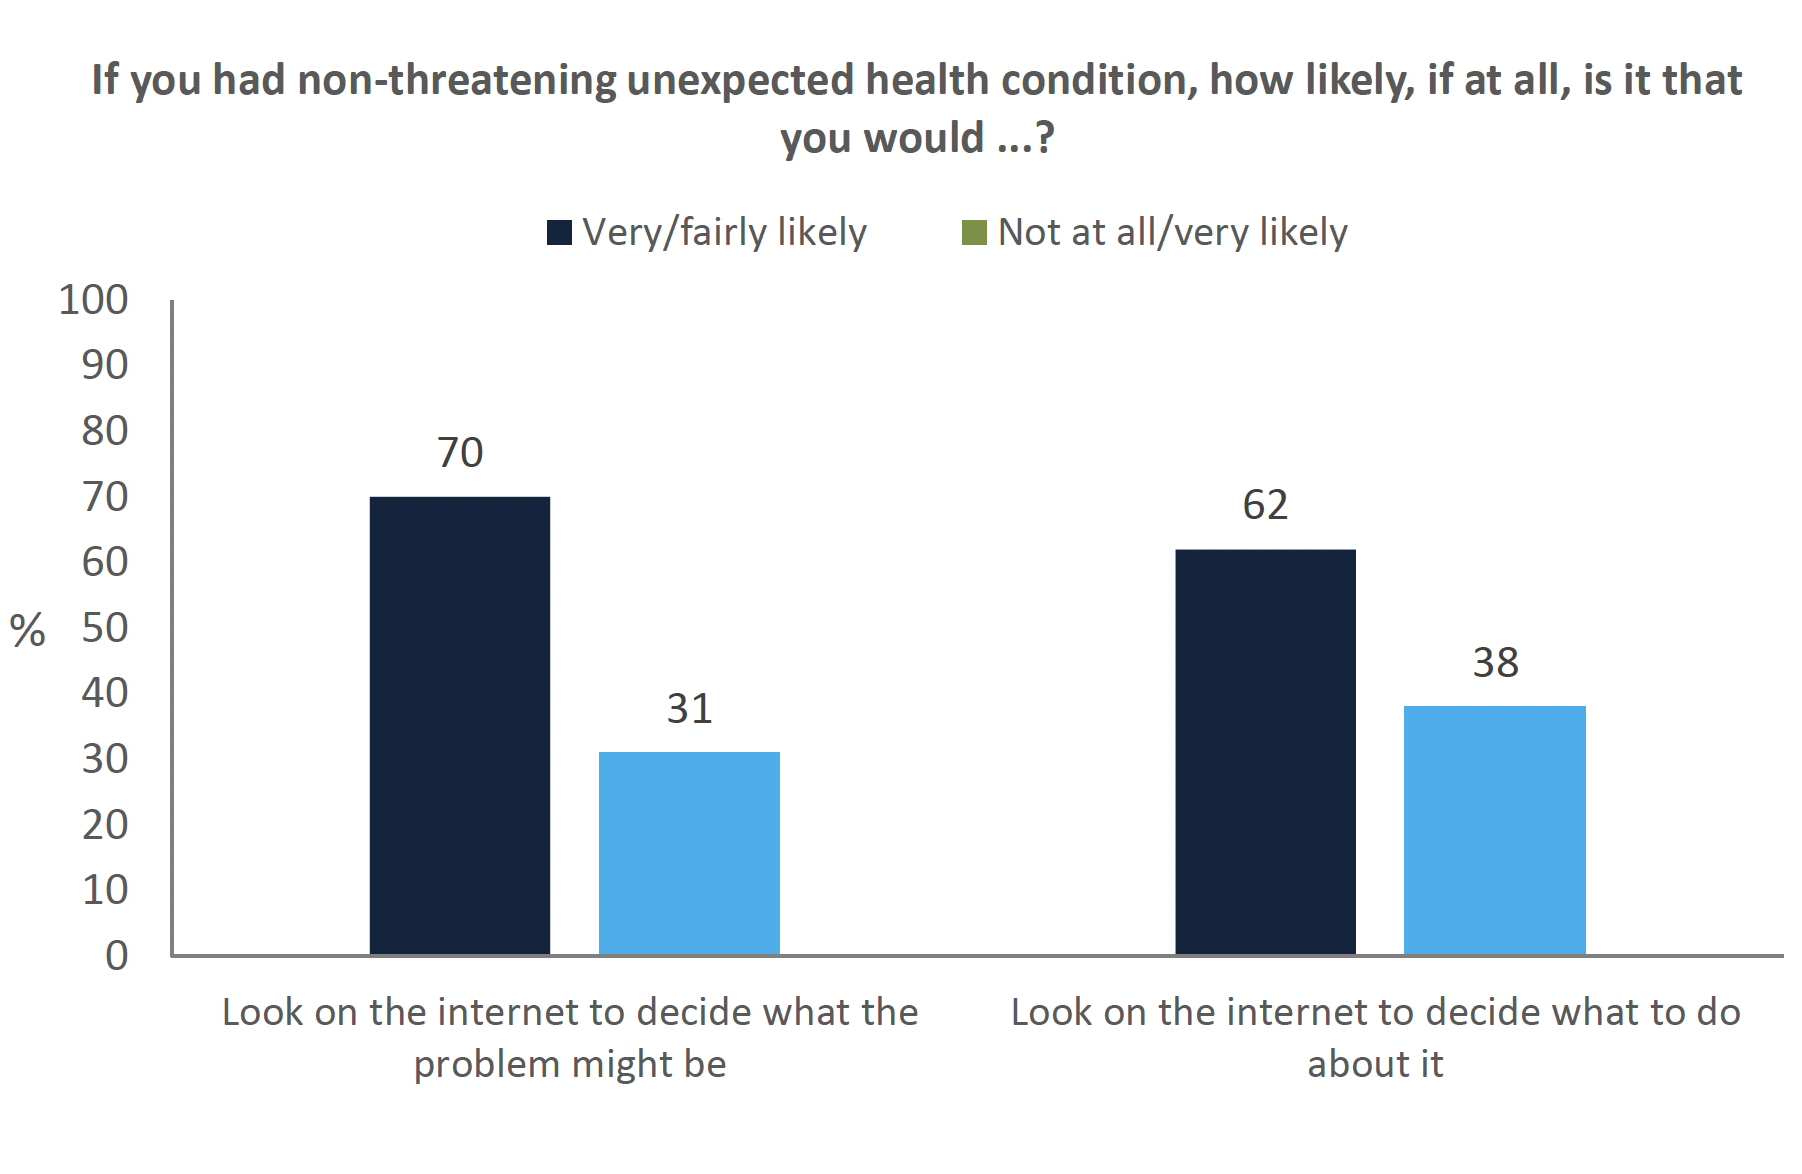 Double vertical bar graph showing likelihood of consulting internet for non-threatening health condition
A double vertical bar graph that shows the likelihood of using the internet in relation to an unexpected health condition. Respondents were asked if they were likely to ‘Look on the internet to decide what the problem might be’ and ‘Look on the internet to decide what to do about it’. The responses to these two outcomes were very/fairly likely and not at all/very likely. Responses were highest for ‘very/fairly likely’ in both categories.